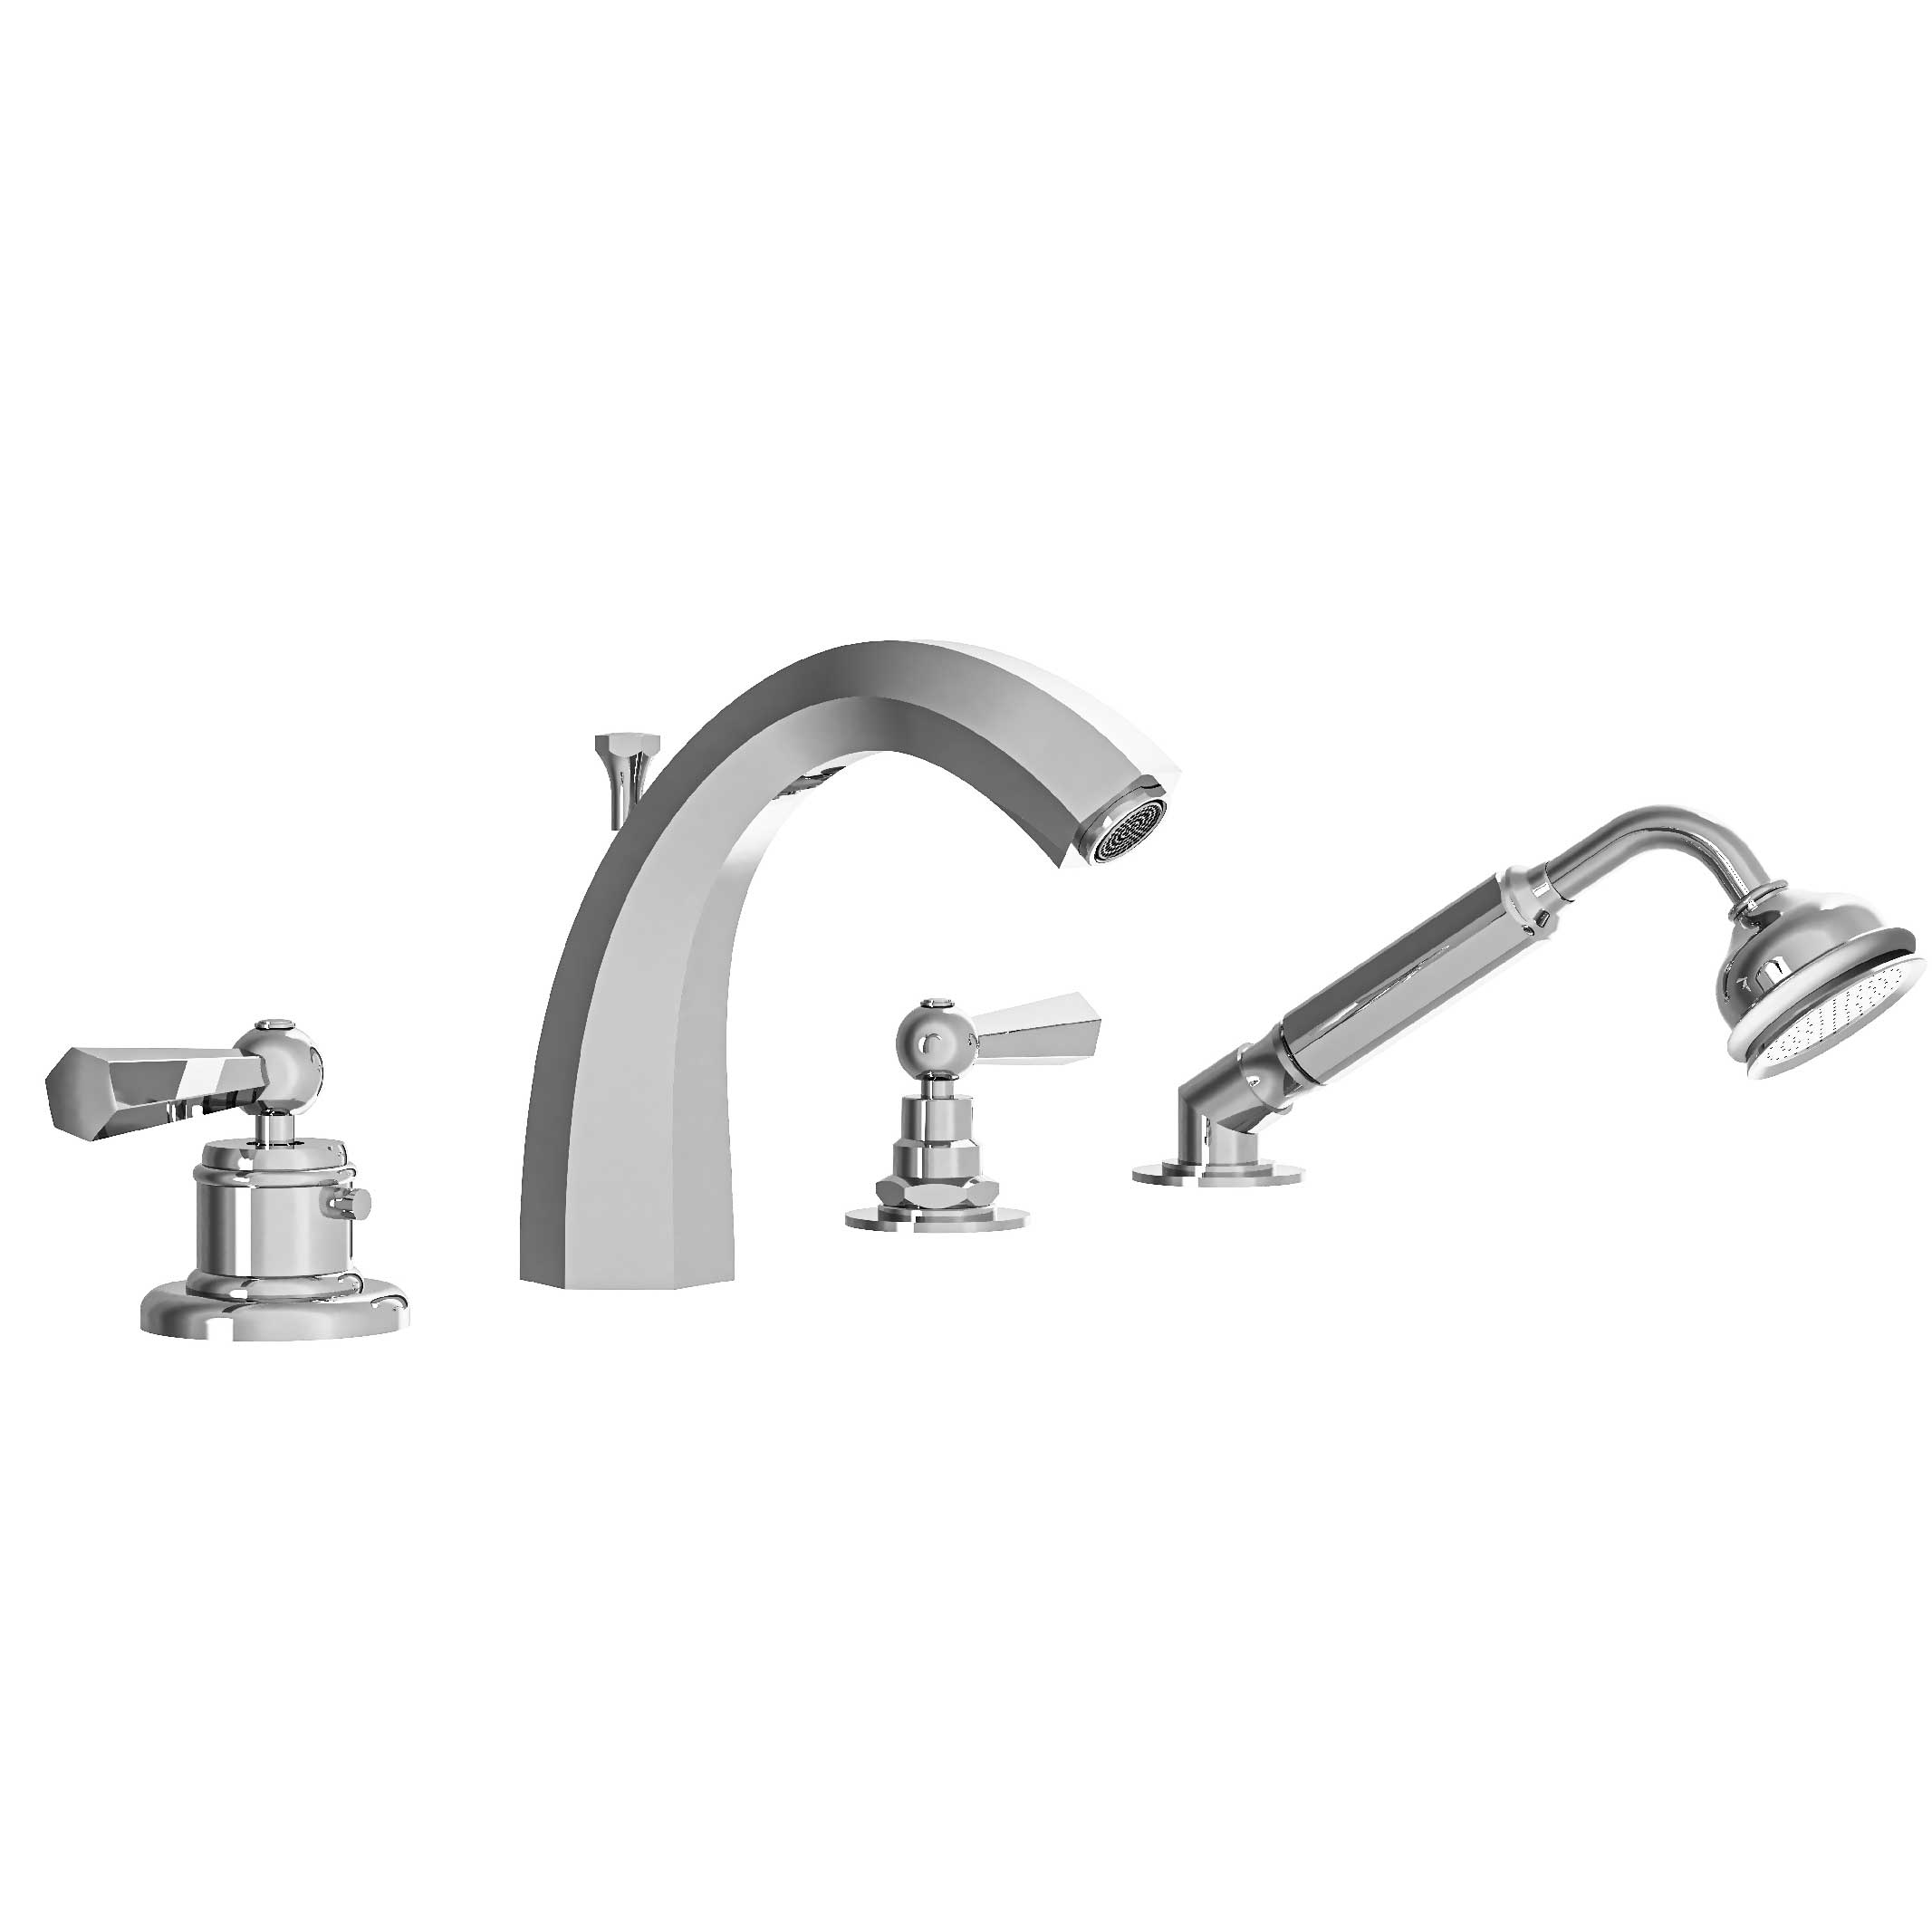 M39-3304TH 4-hole bath and shower thermo. mixer, high spout